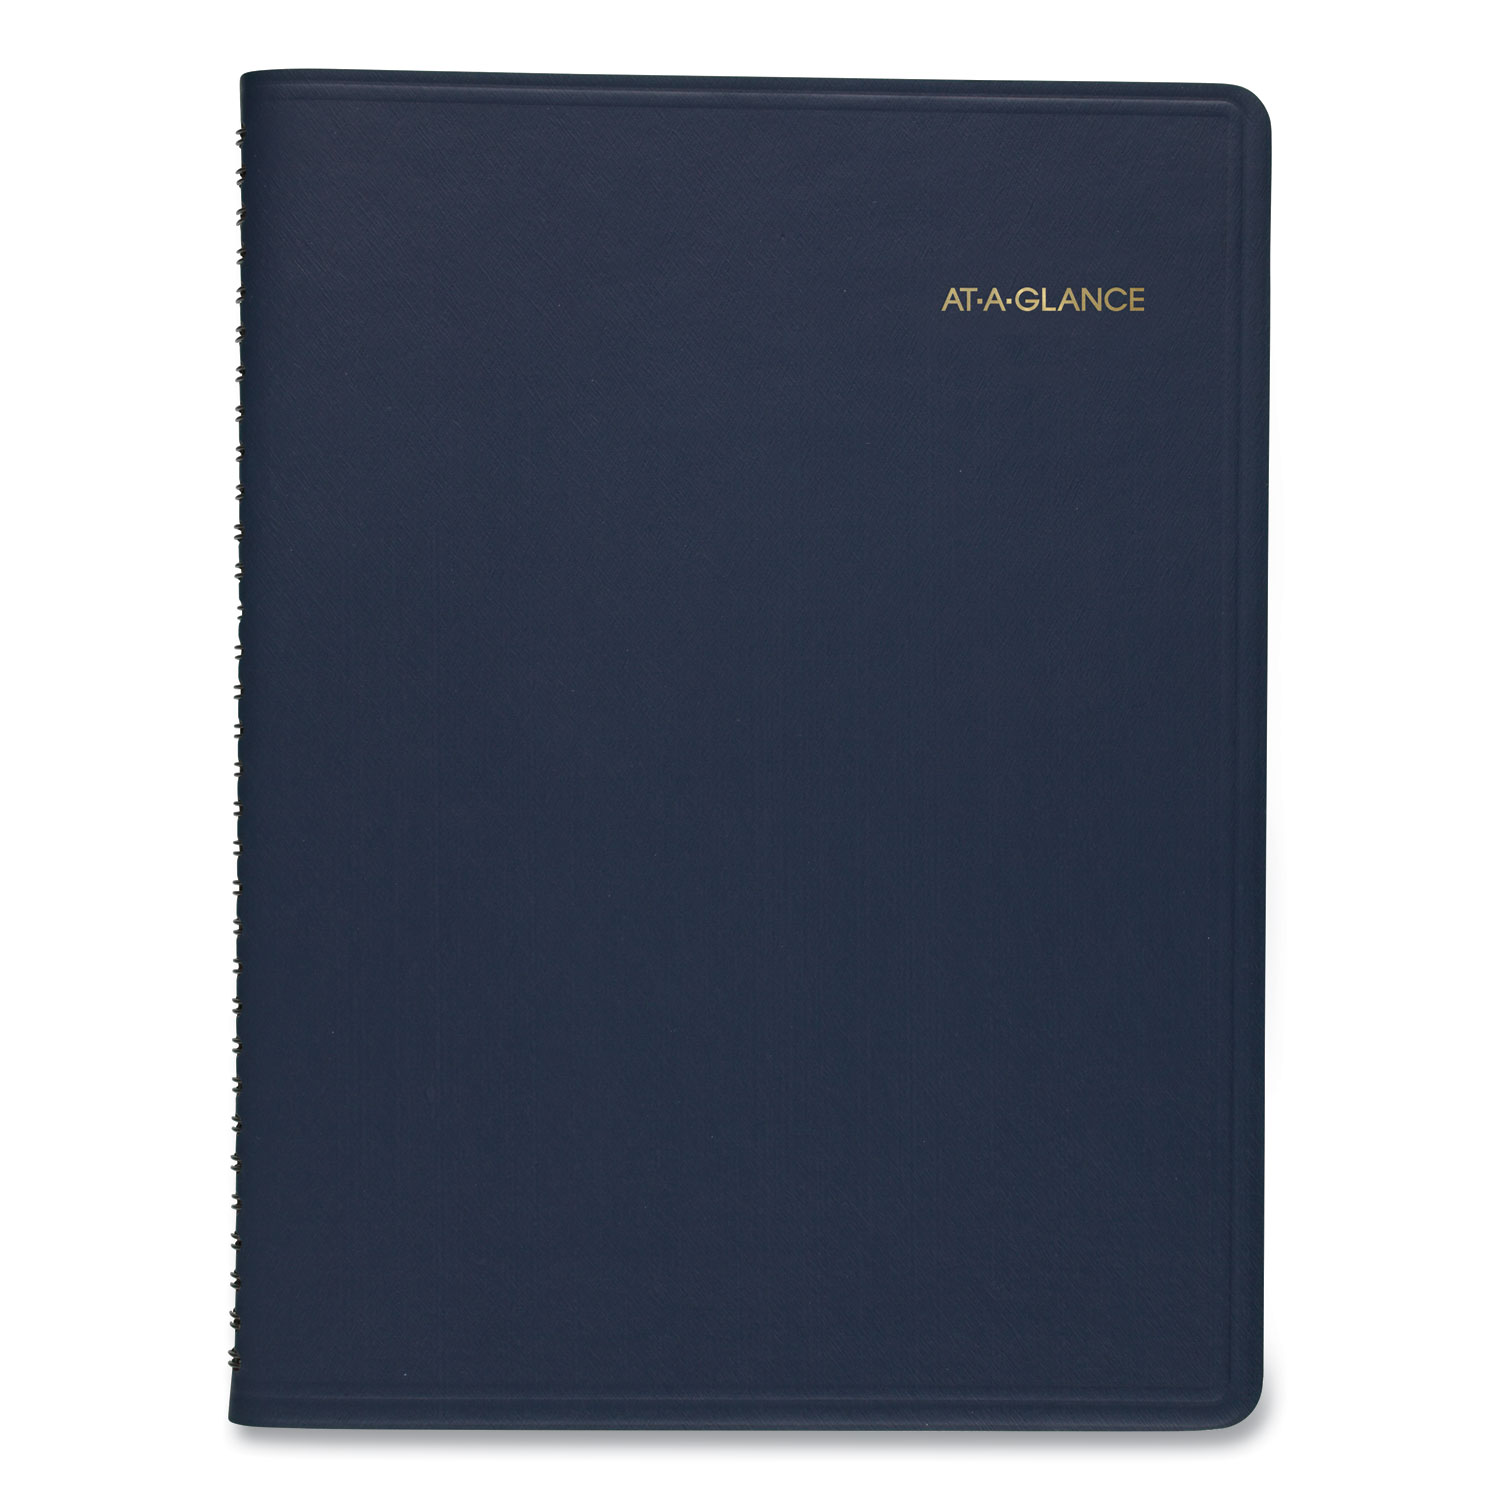  AT-A-GLANCE 7095020 Weekly Appointment Book, 10 7/8 x 8 1/4, Navy, 2020-2021 (AAG7095020) 